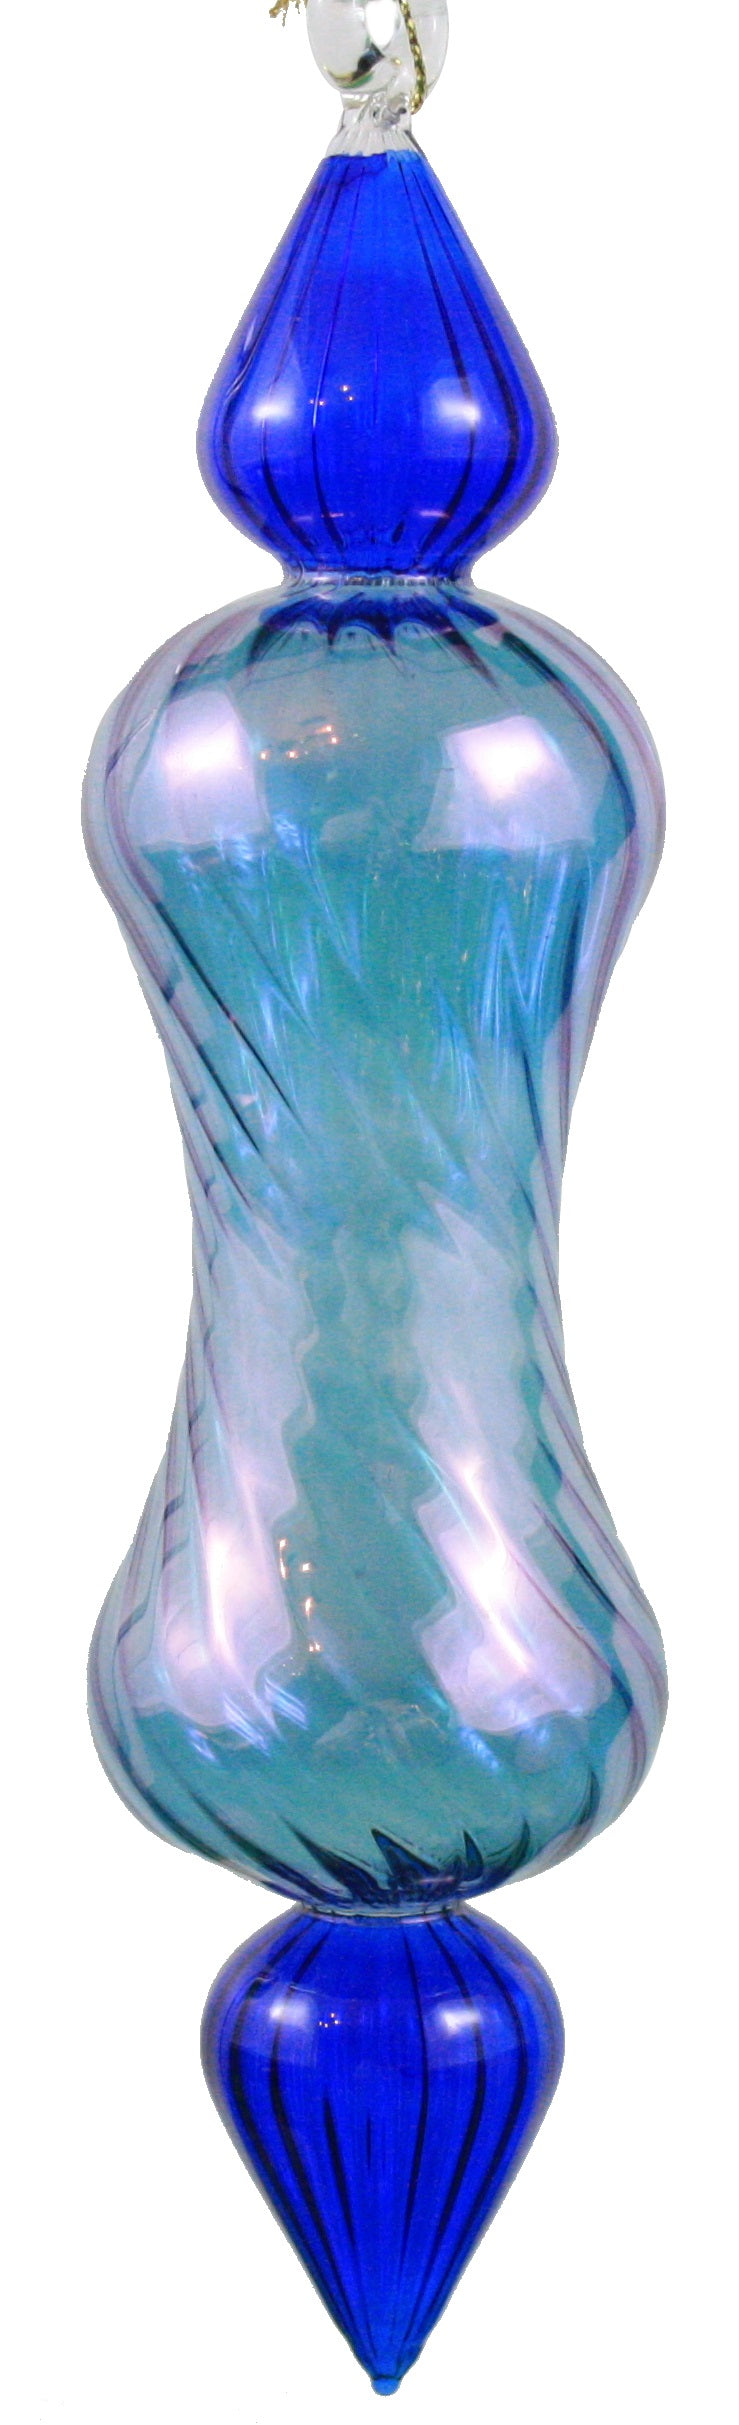 Mid Size mixed Section Twisted Glass Ornament - Blue